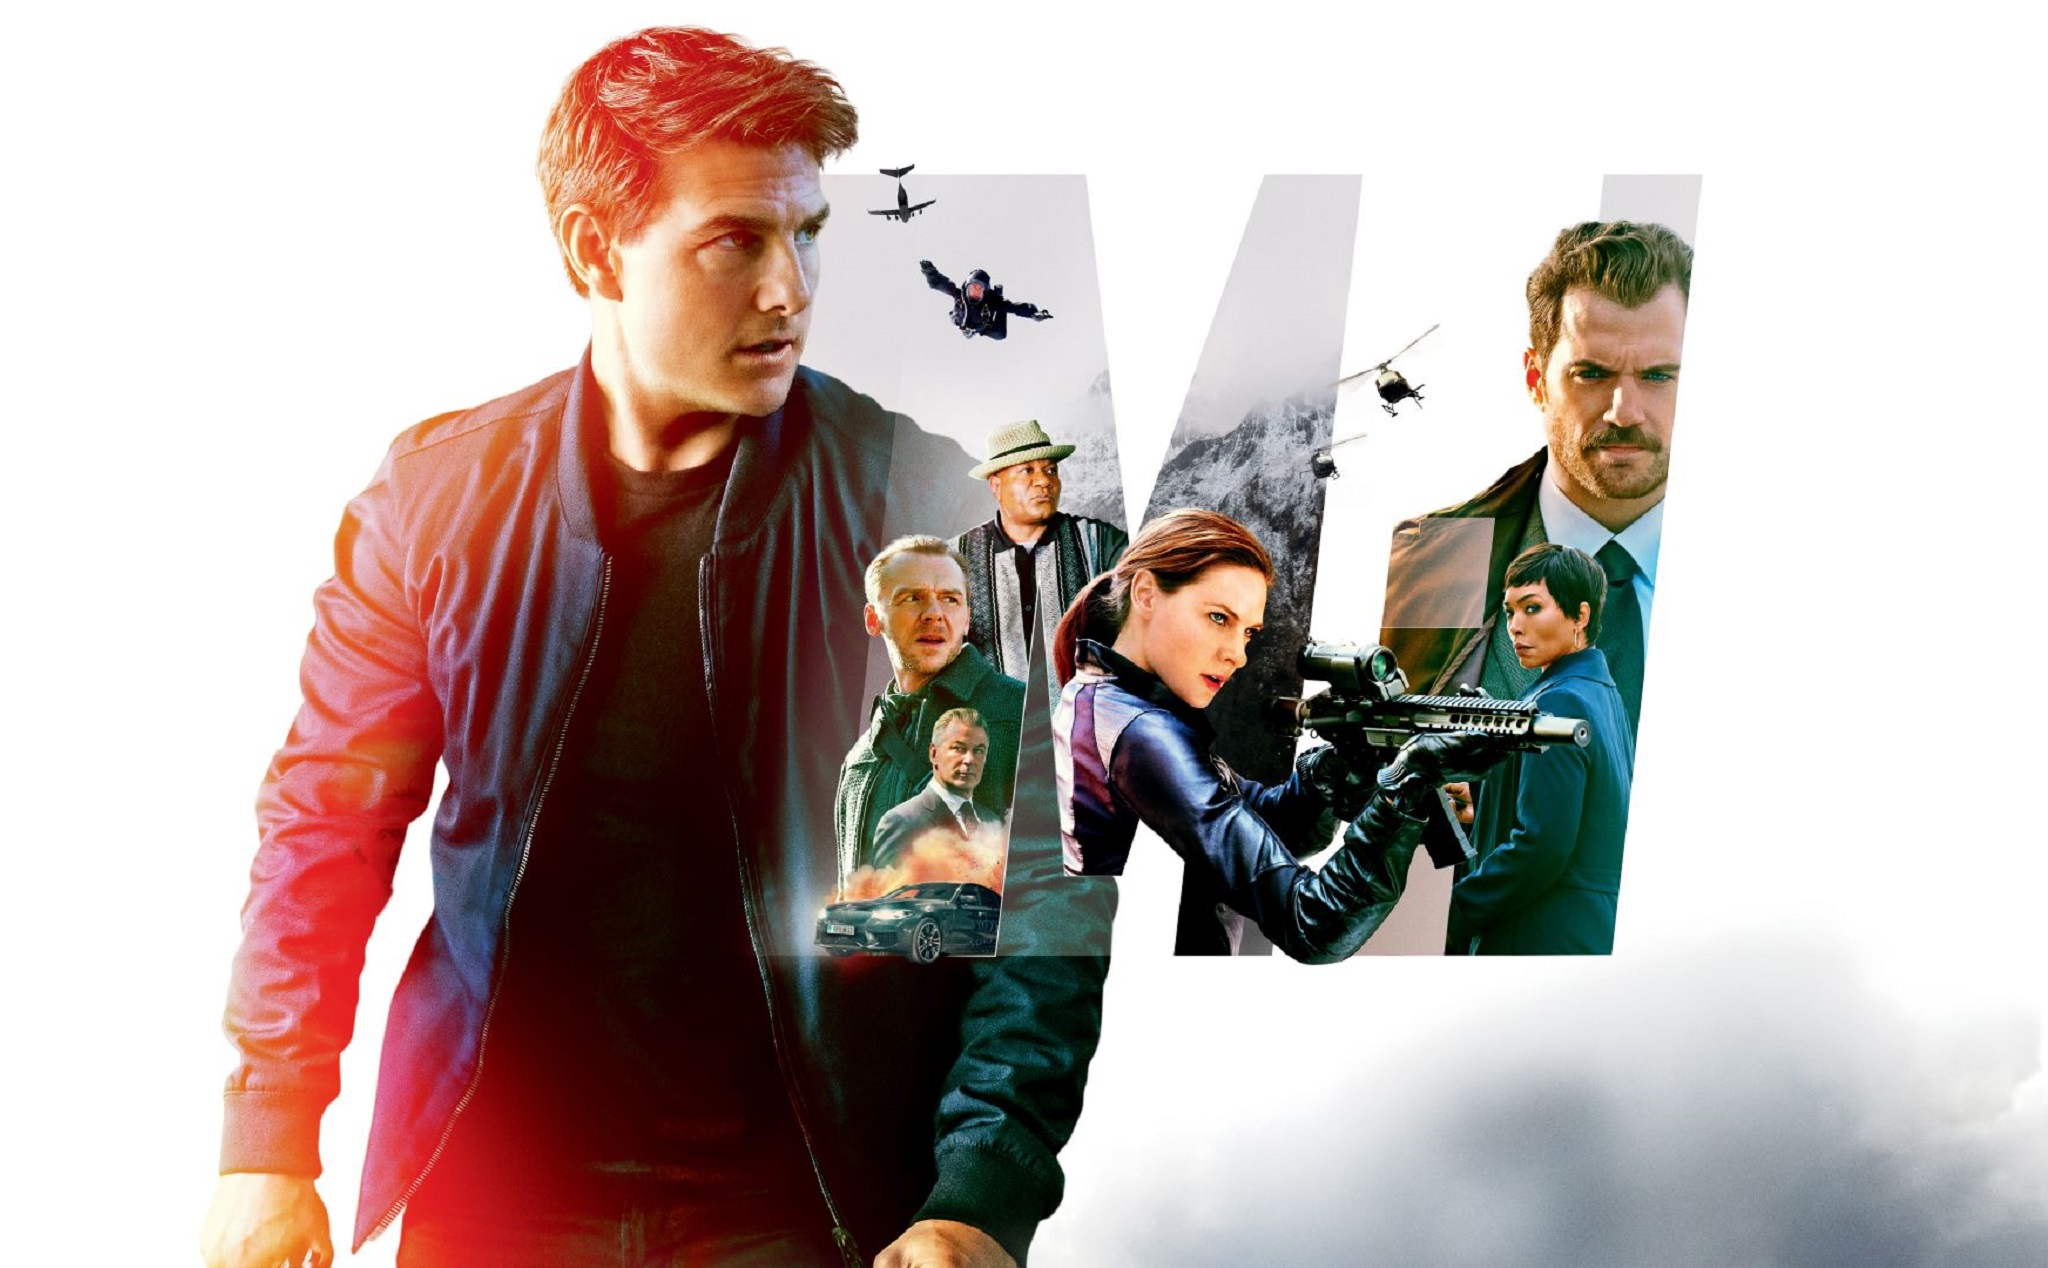 Những phim mới ra rạp cuối tuần này: Mission Impossible Fallout, Wildling, The Music Box...